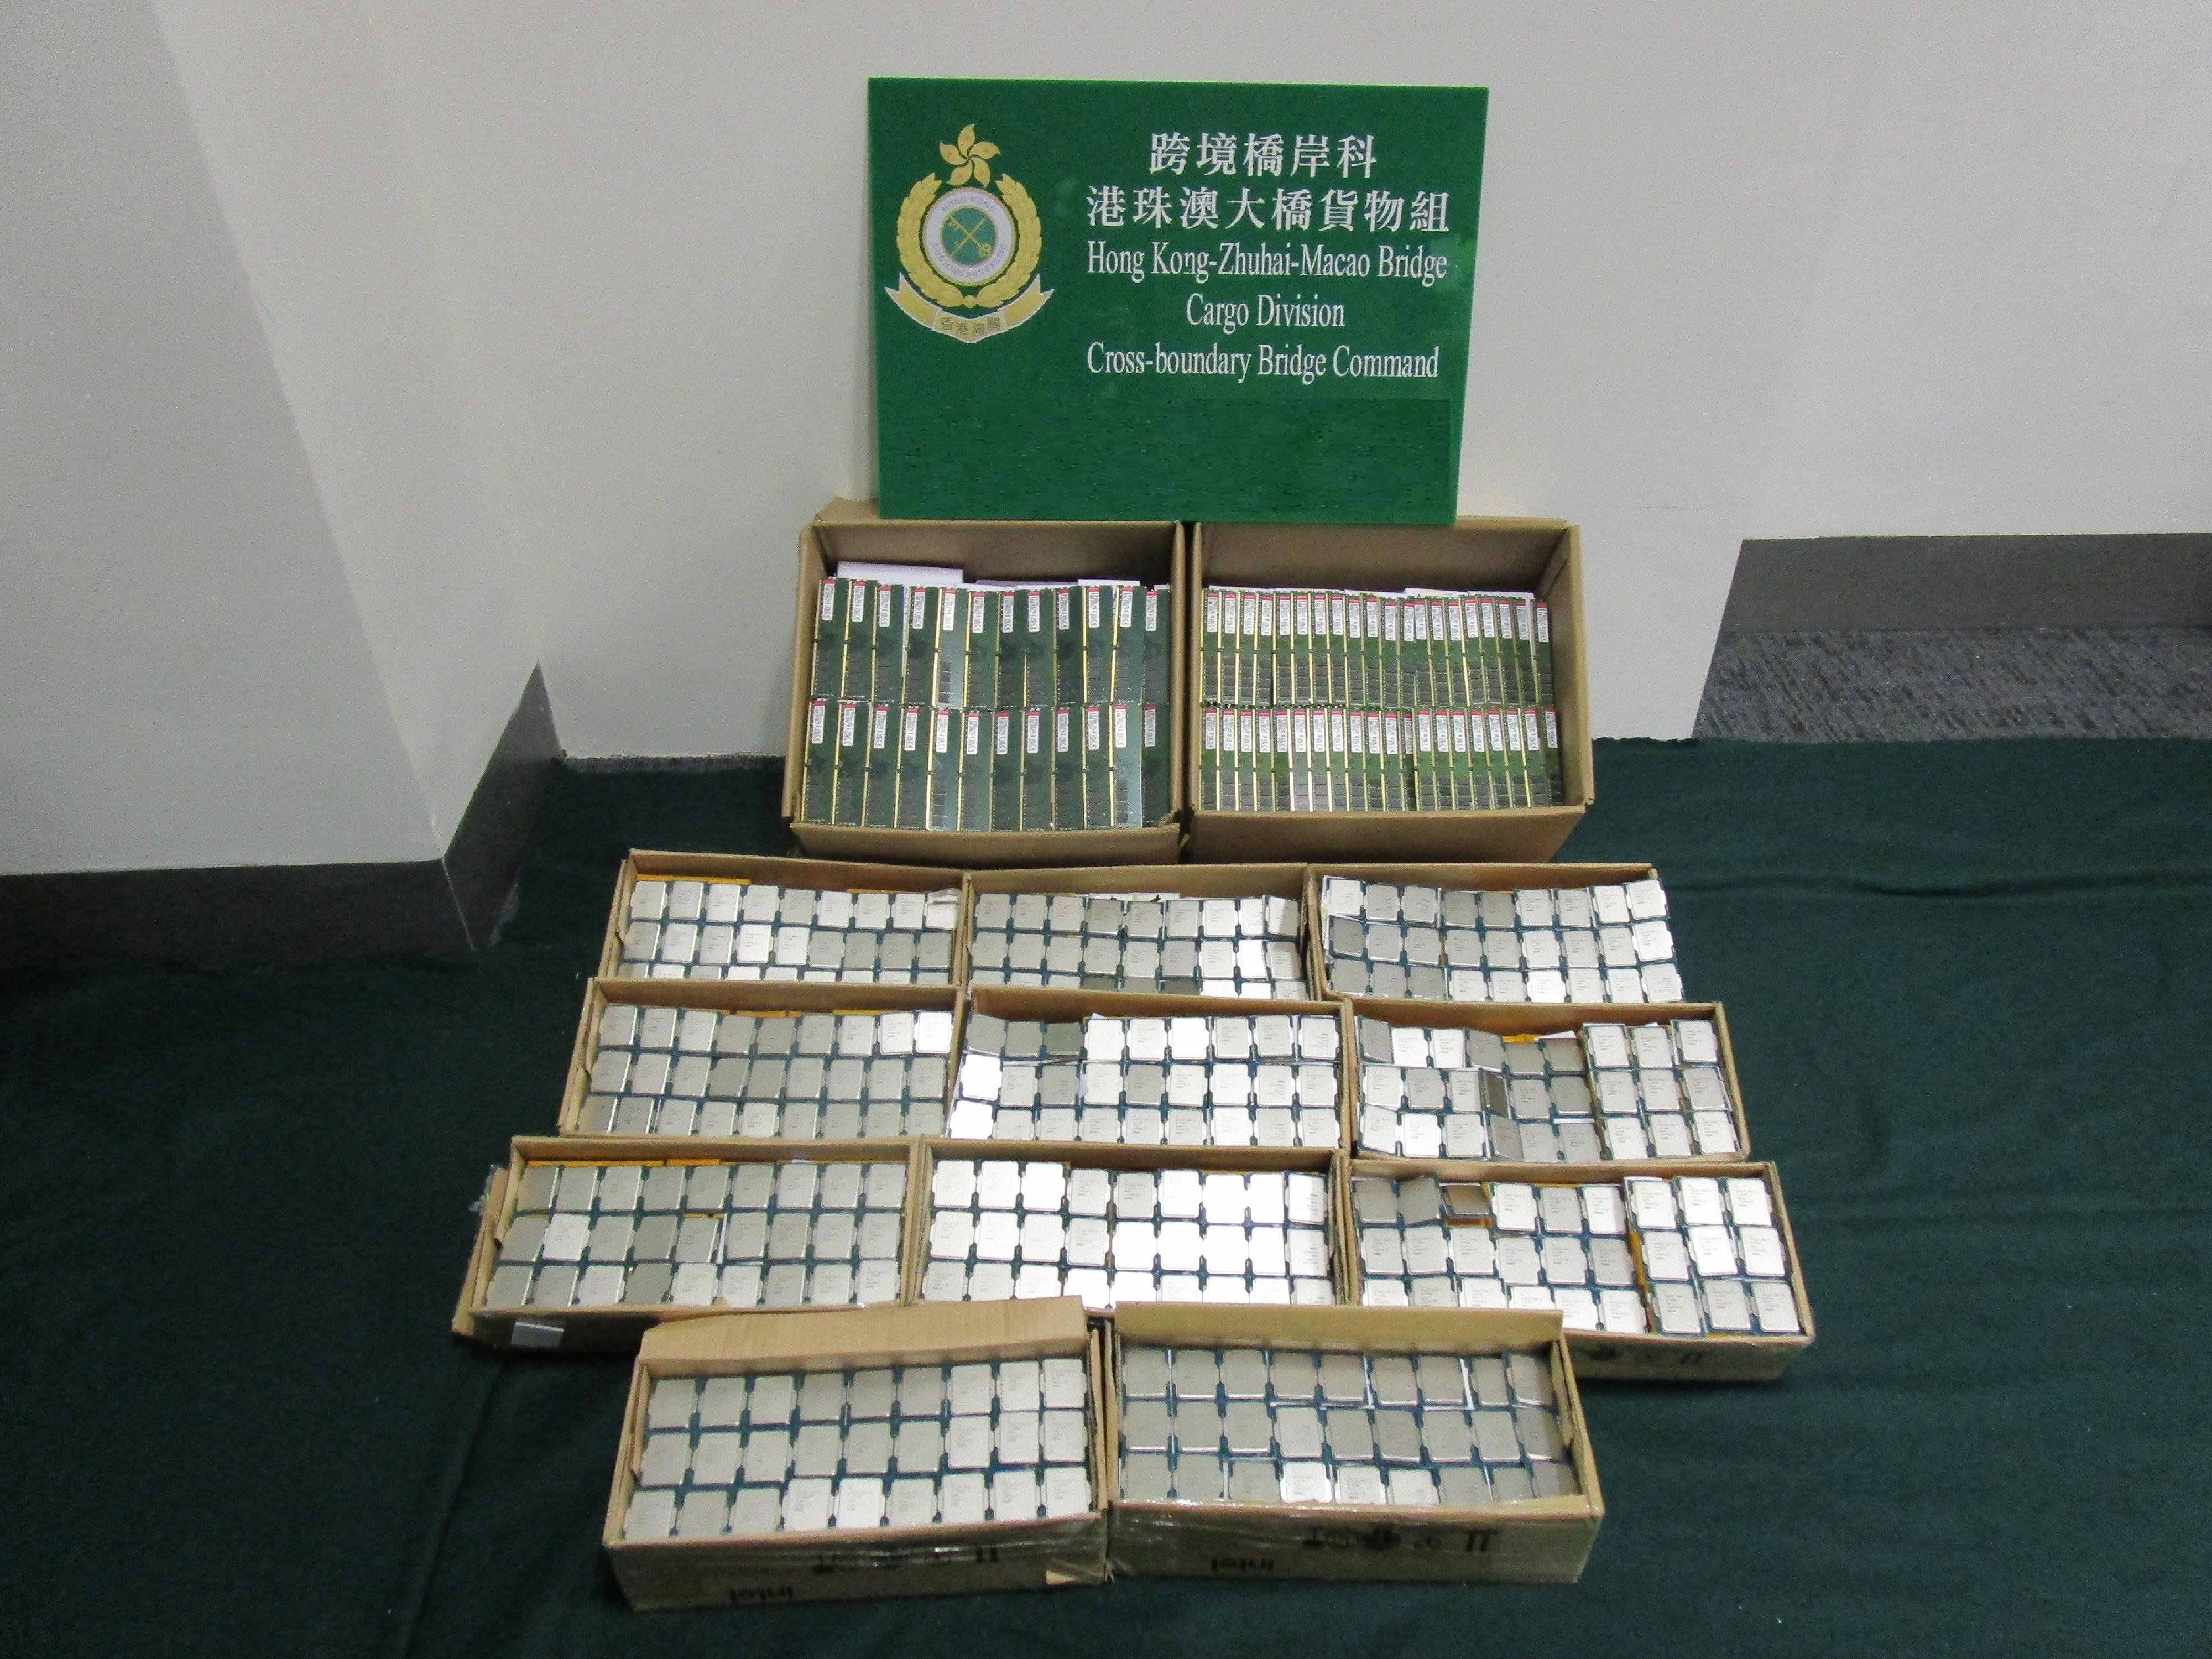 Hong Kong Customs today (November 28) seized approximately 8 000 pieces of suspected smuggled electronic parts, including central processing units and computer RAM units, with a total estimated market value of about $8 million at the Hong Kong-Zhuhai-Macao Bridge Hong Kong Port. Photo shows the suspected smuggled electronic parts.